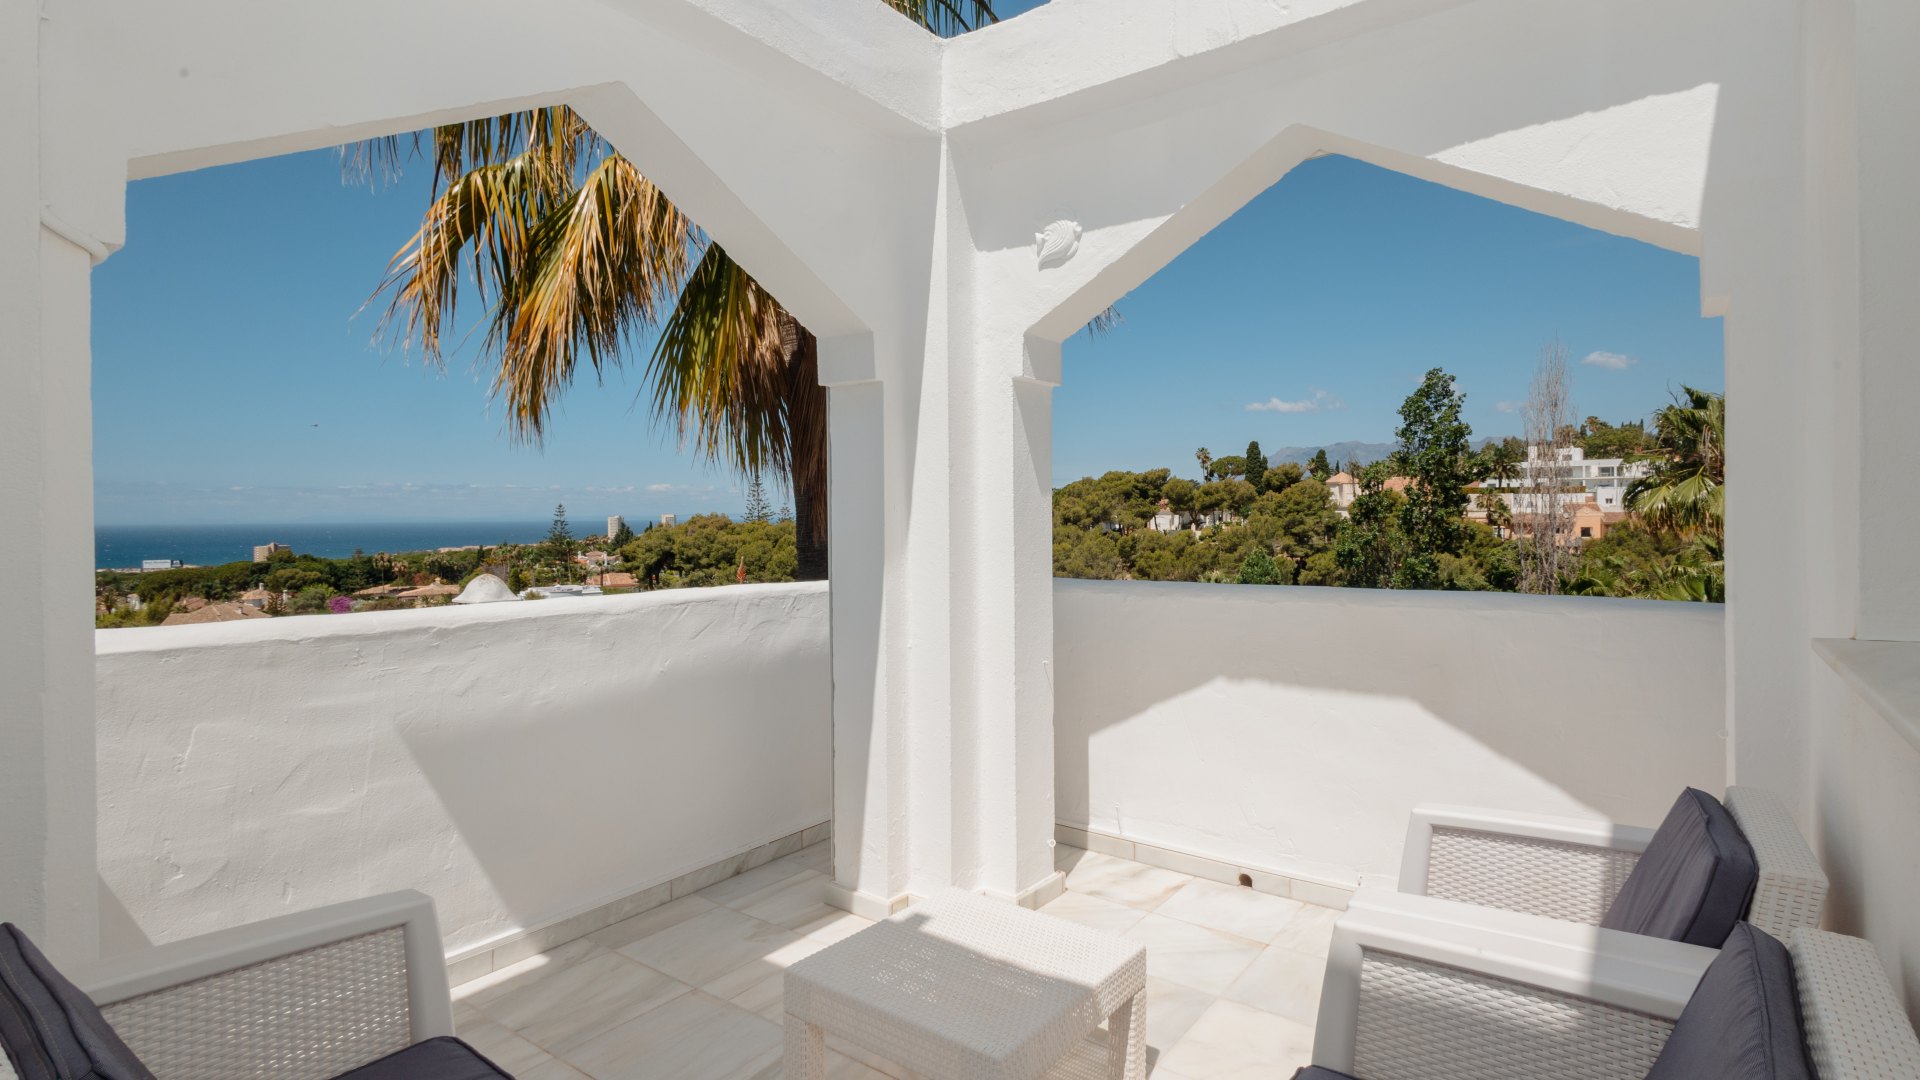 Apartment, close to the beach and sea views, in Marbella